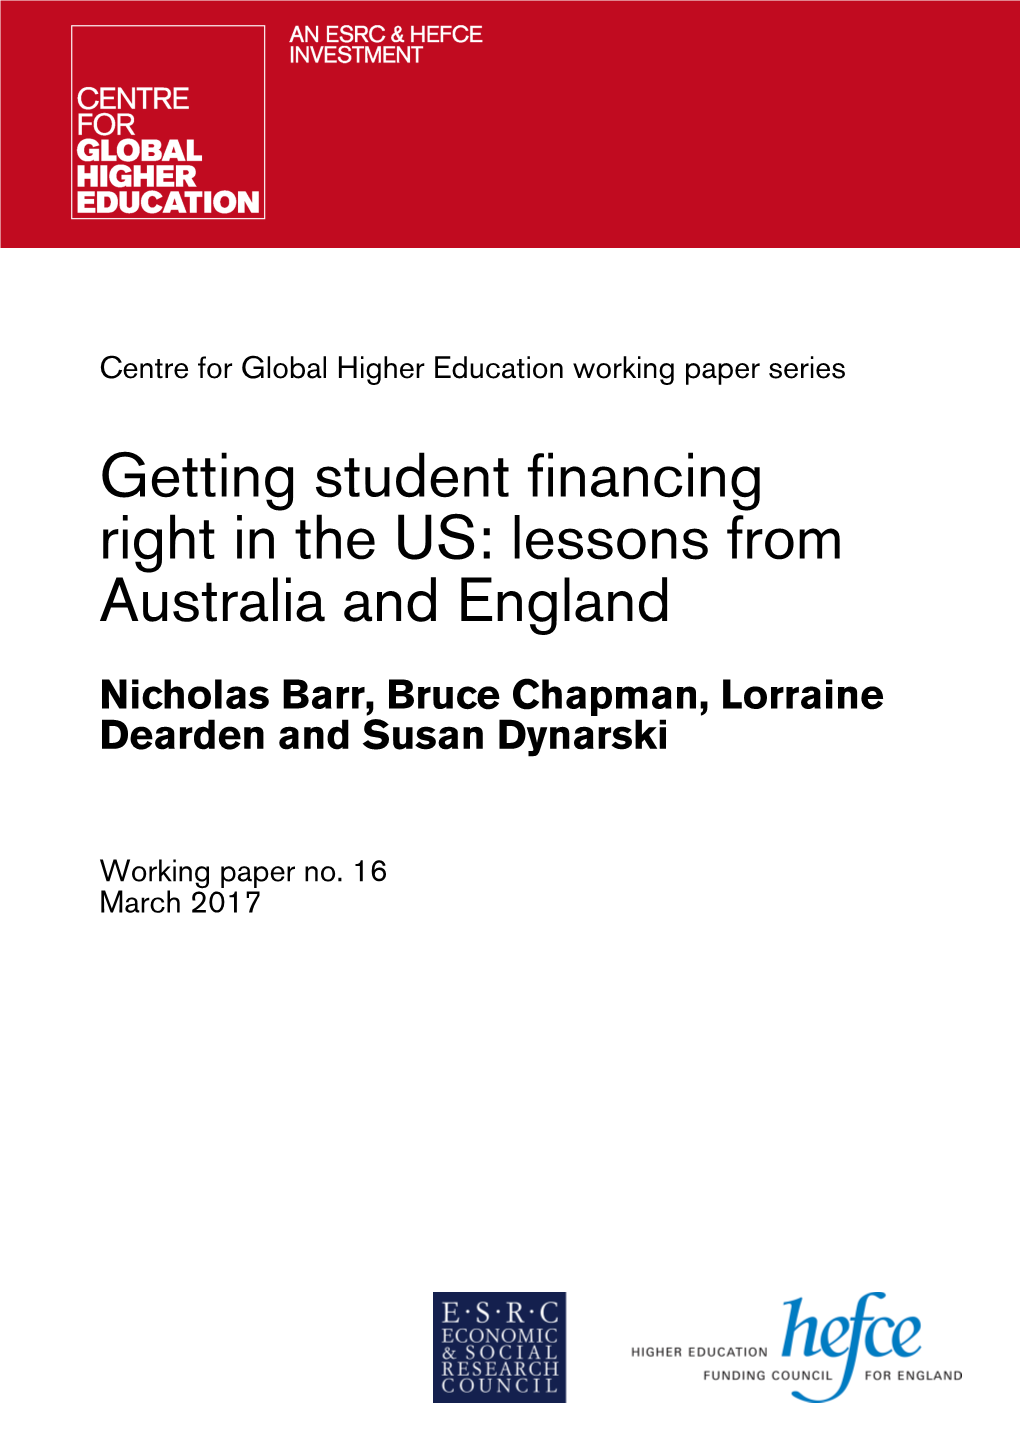 Getting Student Financing Right in the US: Lessons from Australia and England